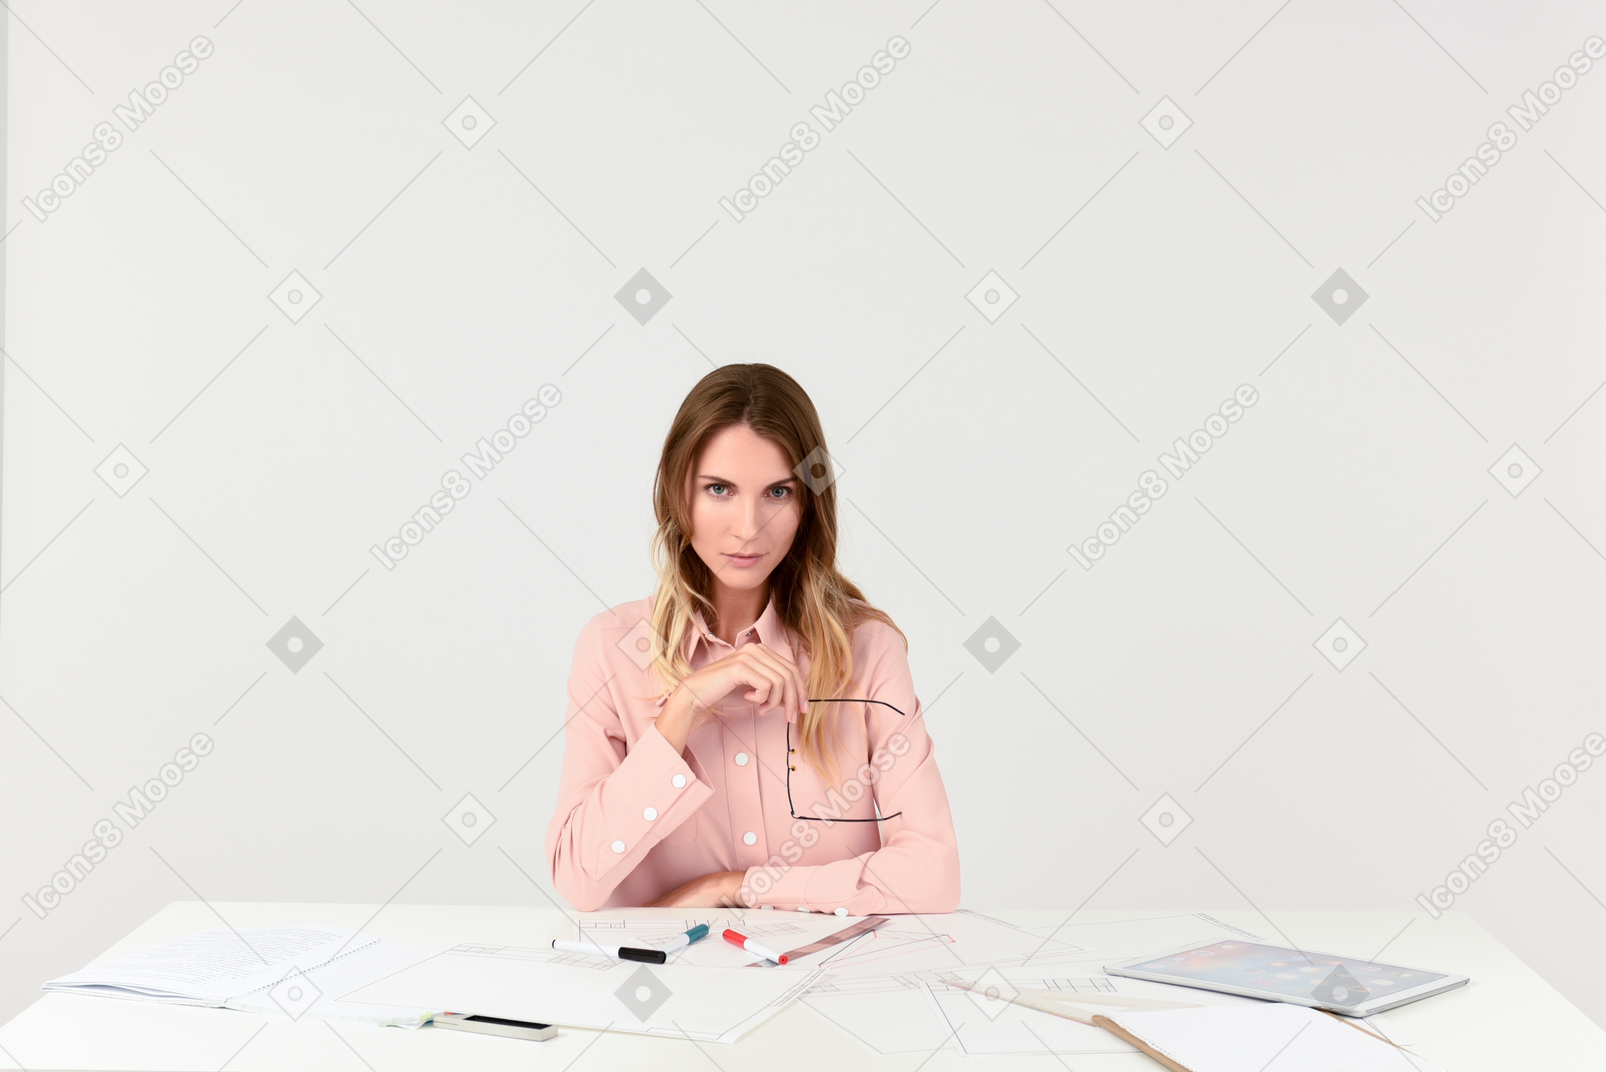 Female architect sitting at the table and holding glasses